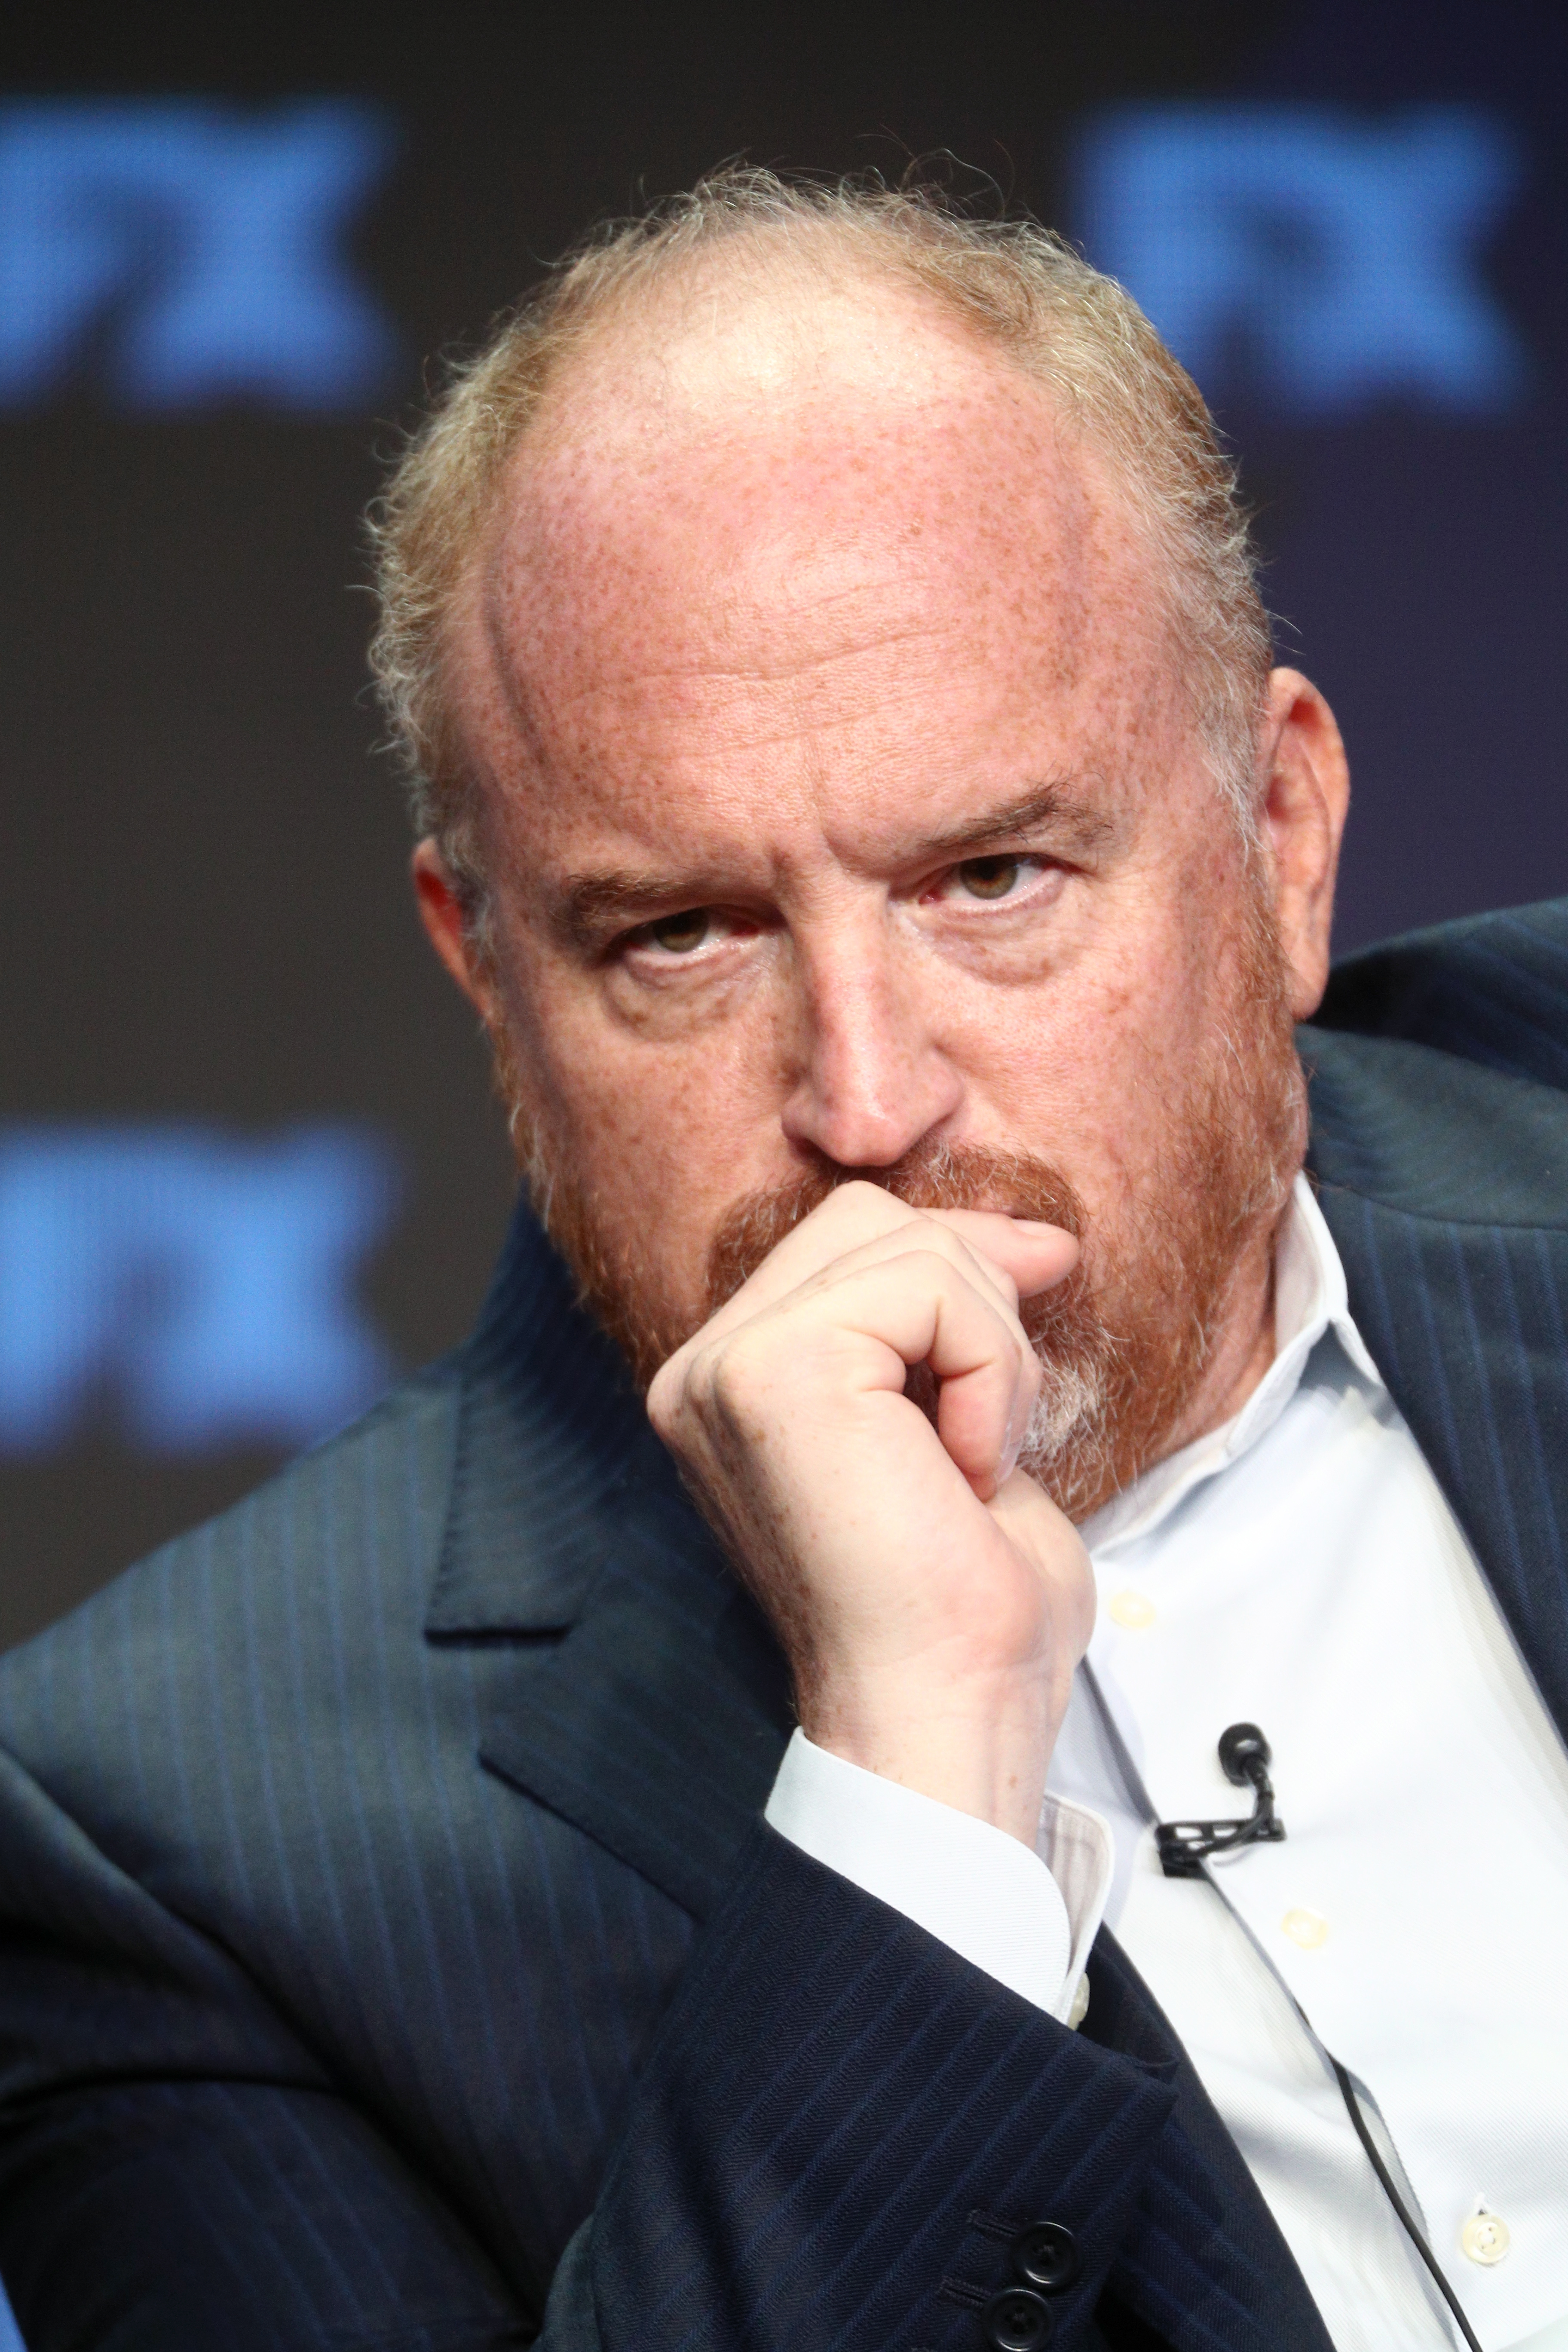 Louis C.K. attends the 2017 Summer Television Critics Association Press Tour at The Beverly Hilton Hotel on August 9, 2017, in California. | Source: Getty Images